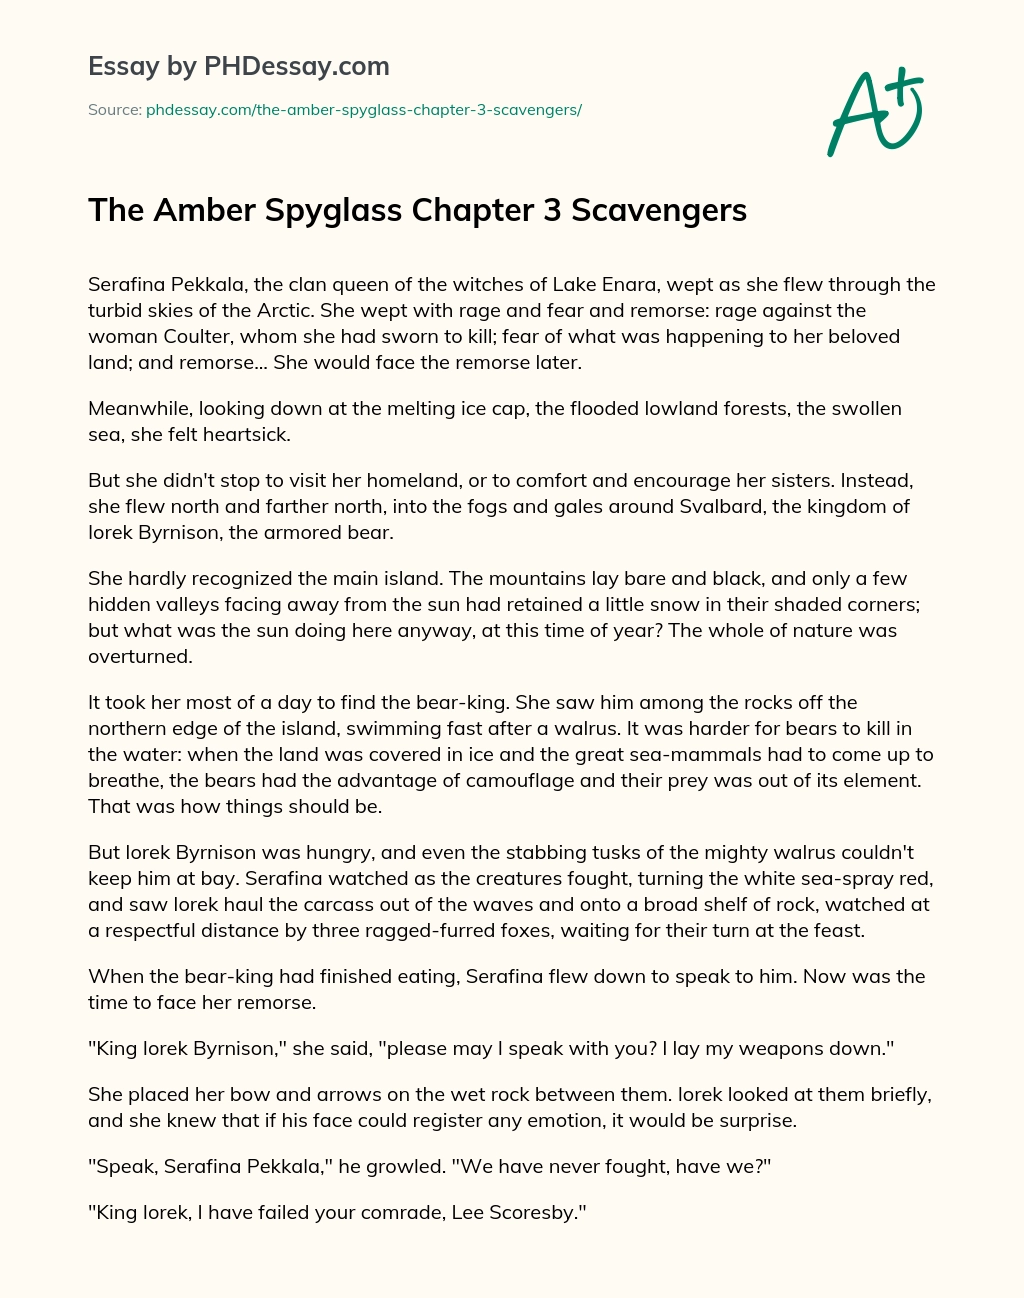 The Amber Spyglass Chapter 3 Scavengers essay